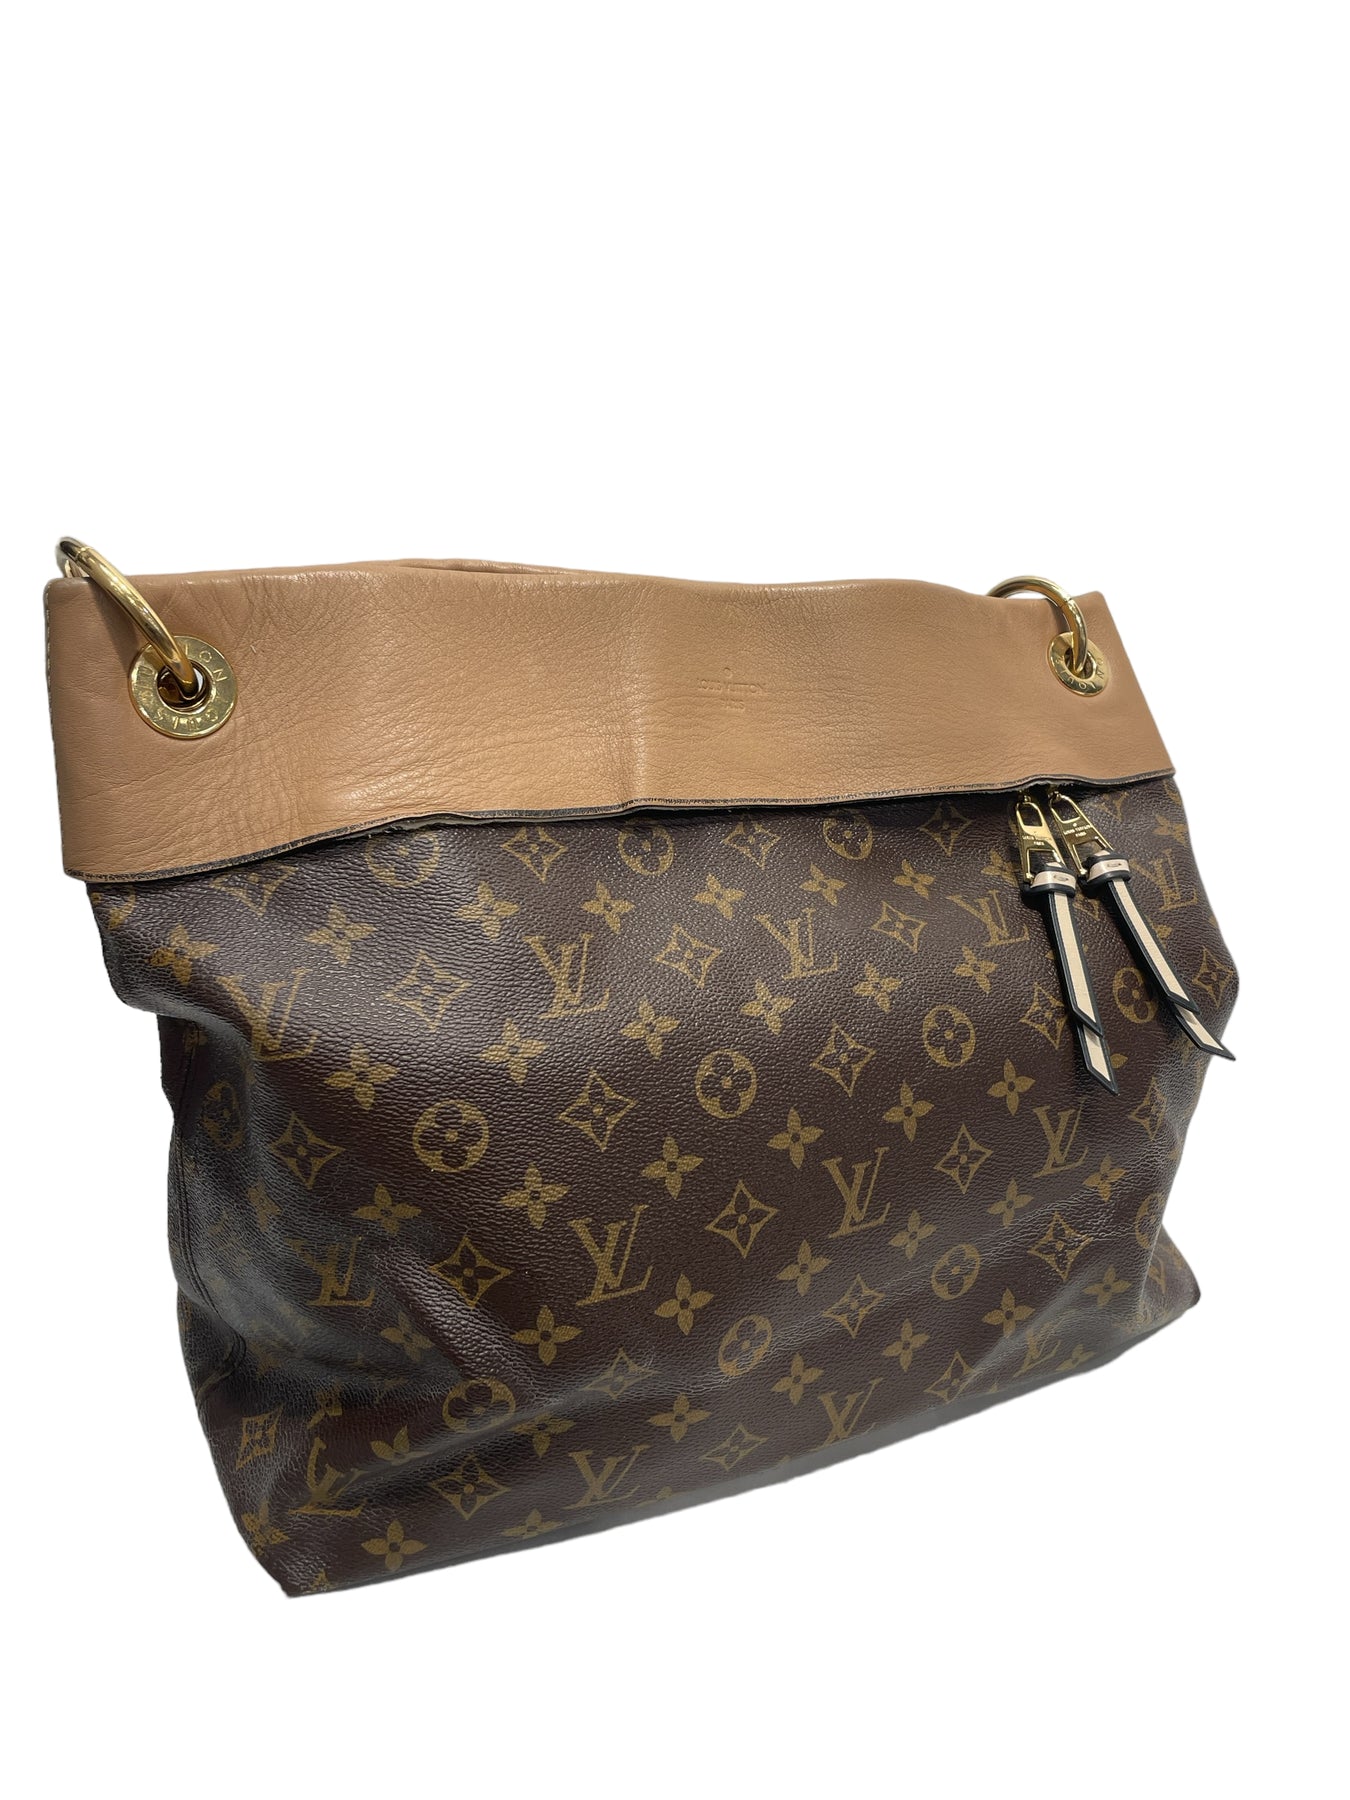 [Japan Used Bag] Second Hand Louis Vuitton Handbag/Leather/Brw/Whole  Pattern Bag